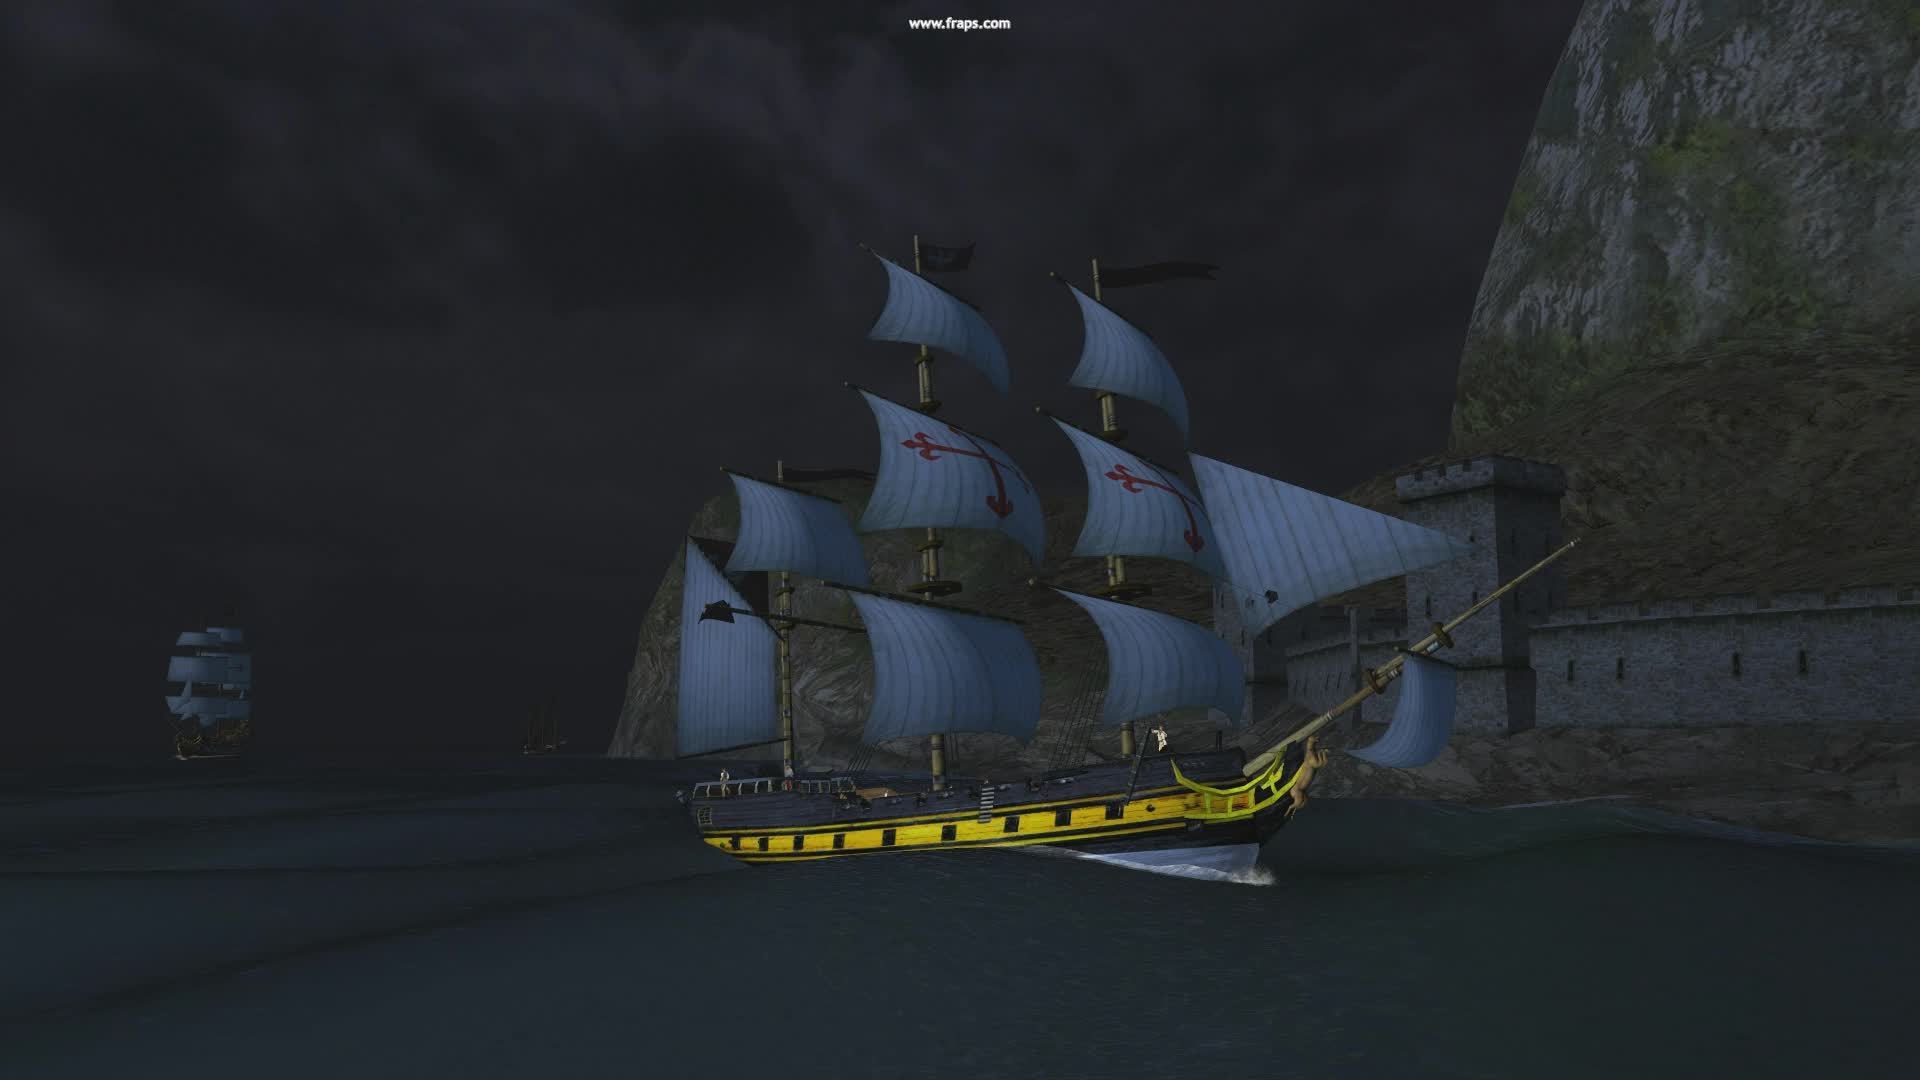 pirates of the caribbean game mod